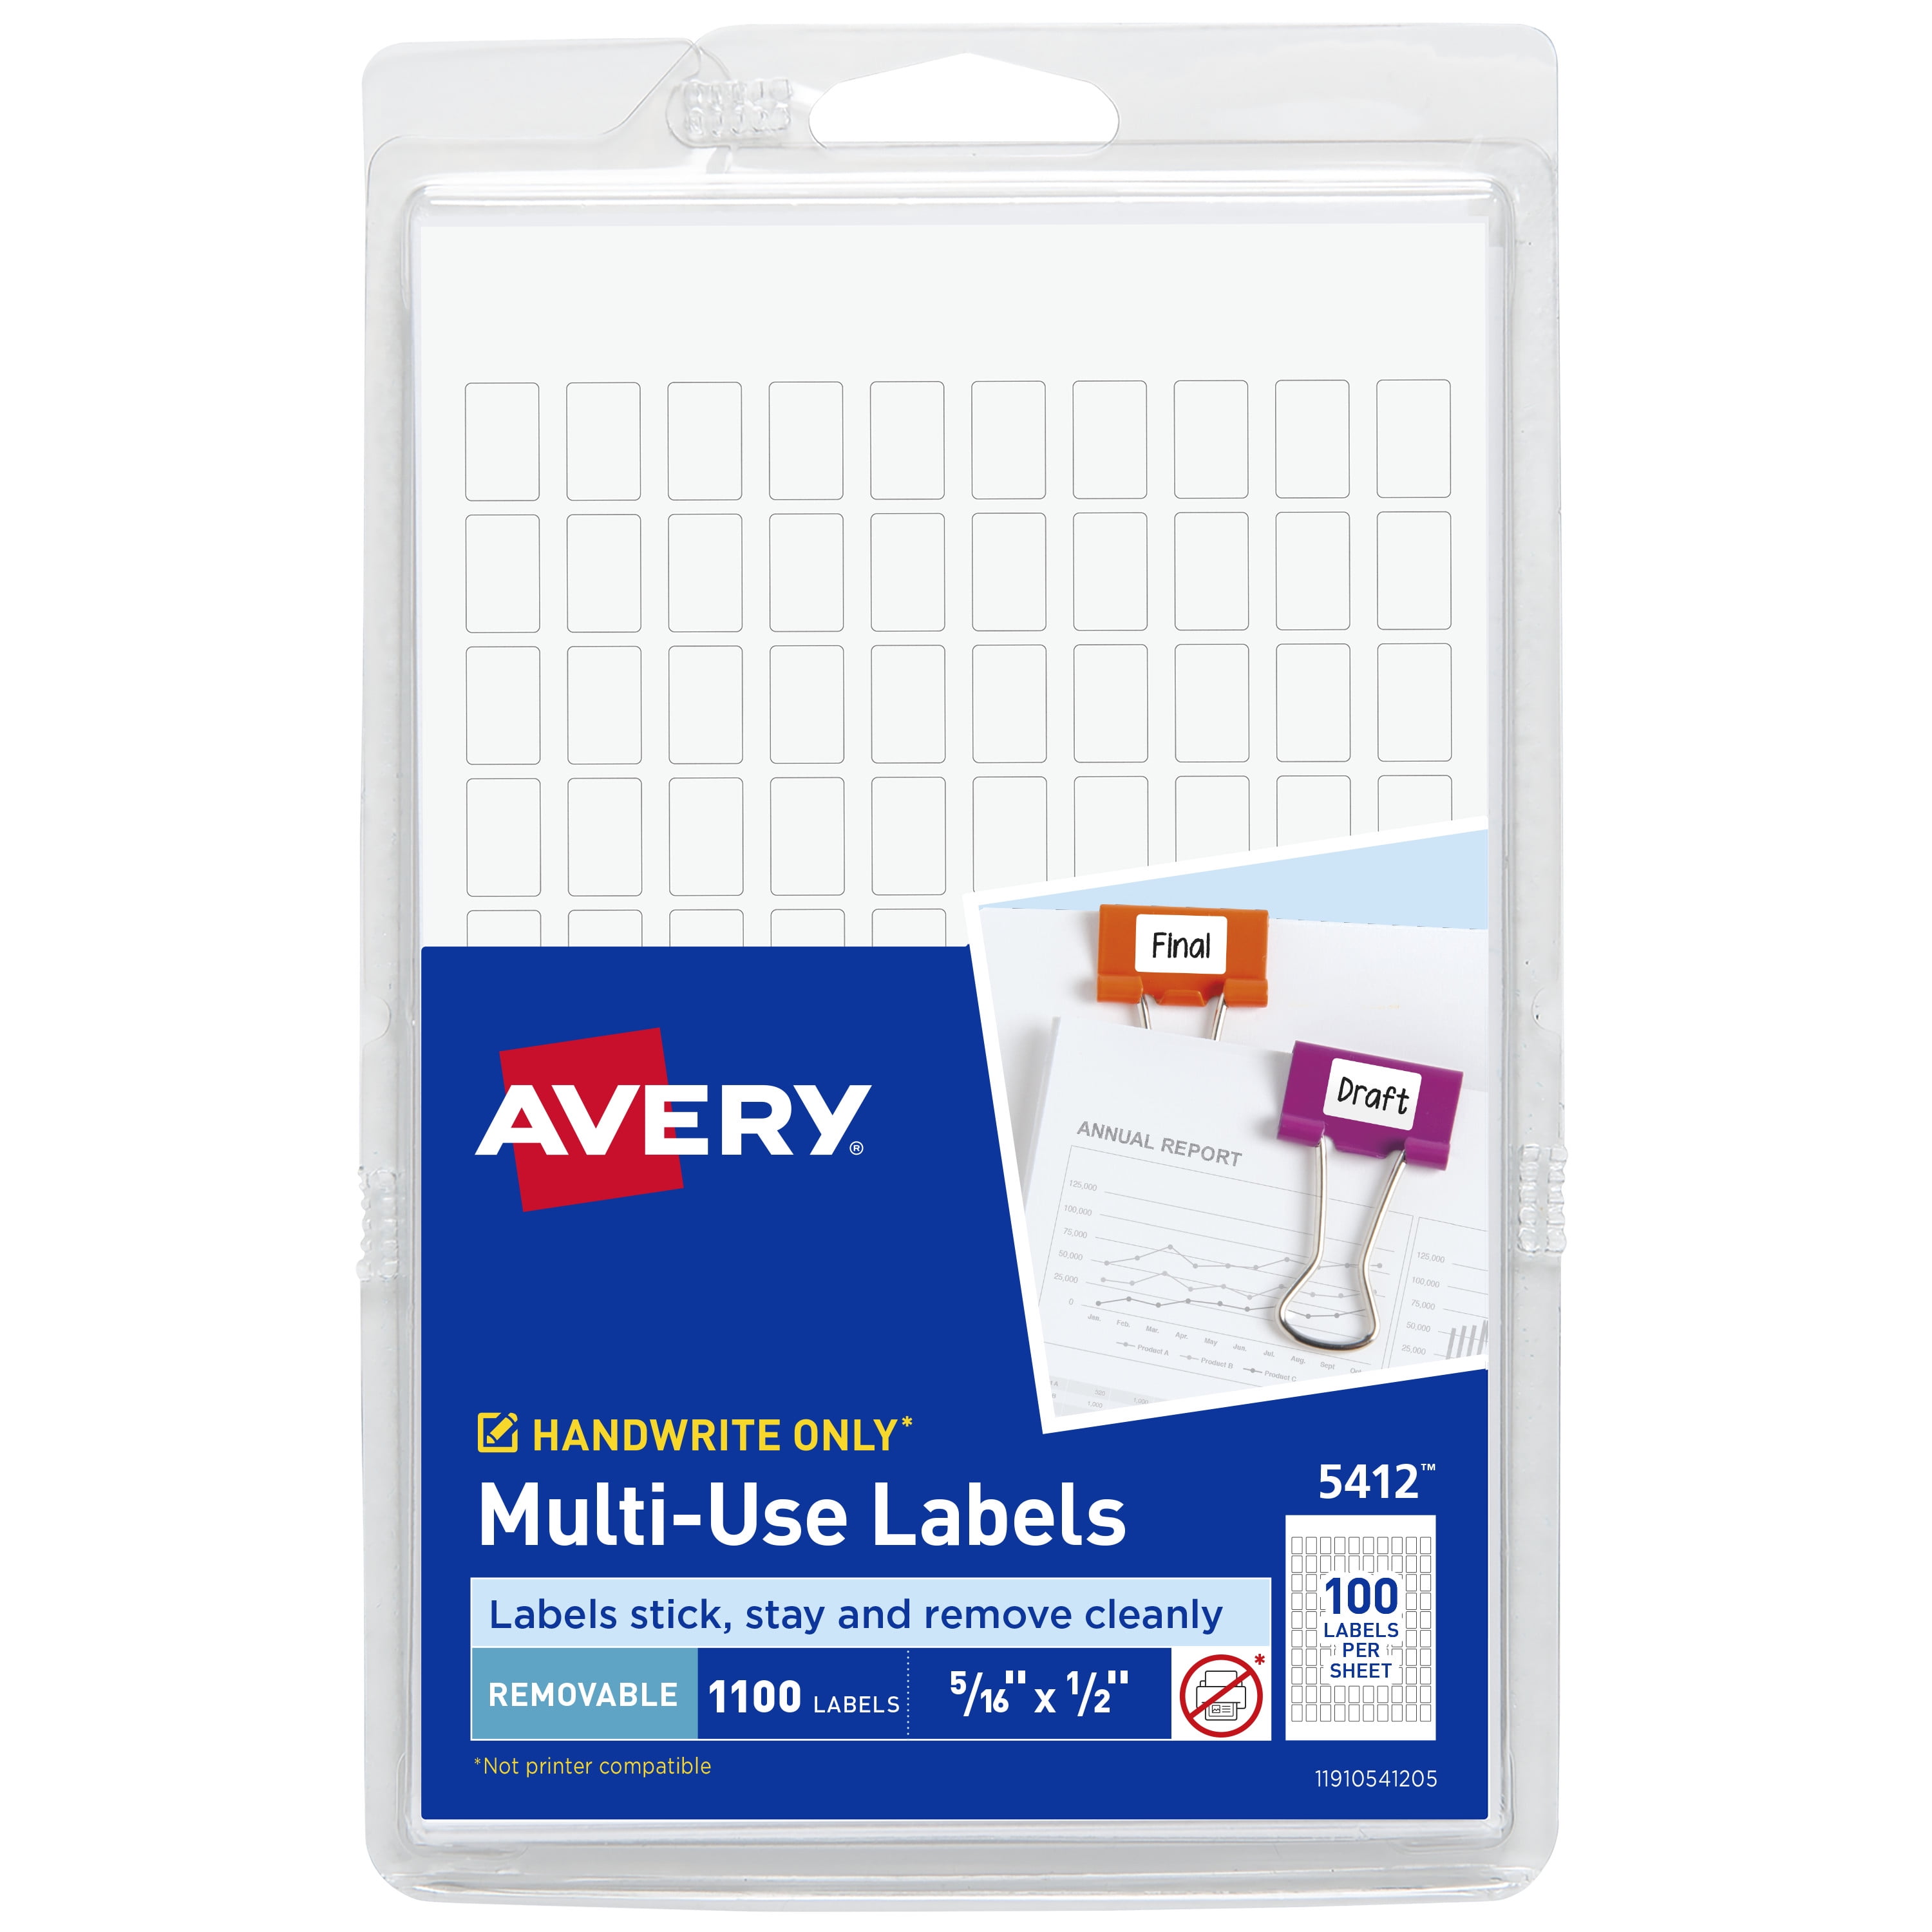 Avery Hole Reinforcements, White, 1000 Labels (5720)